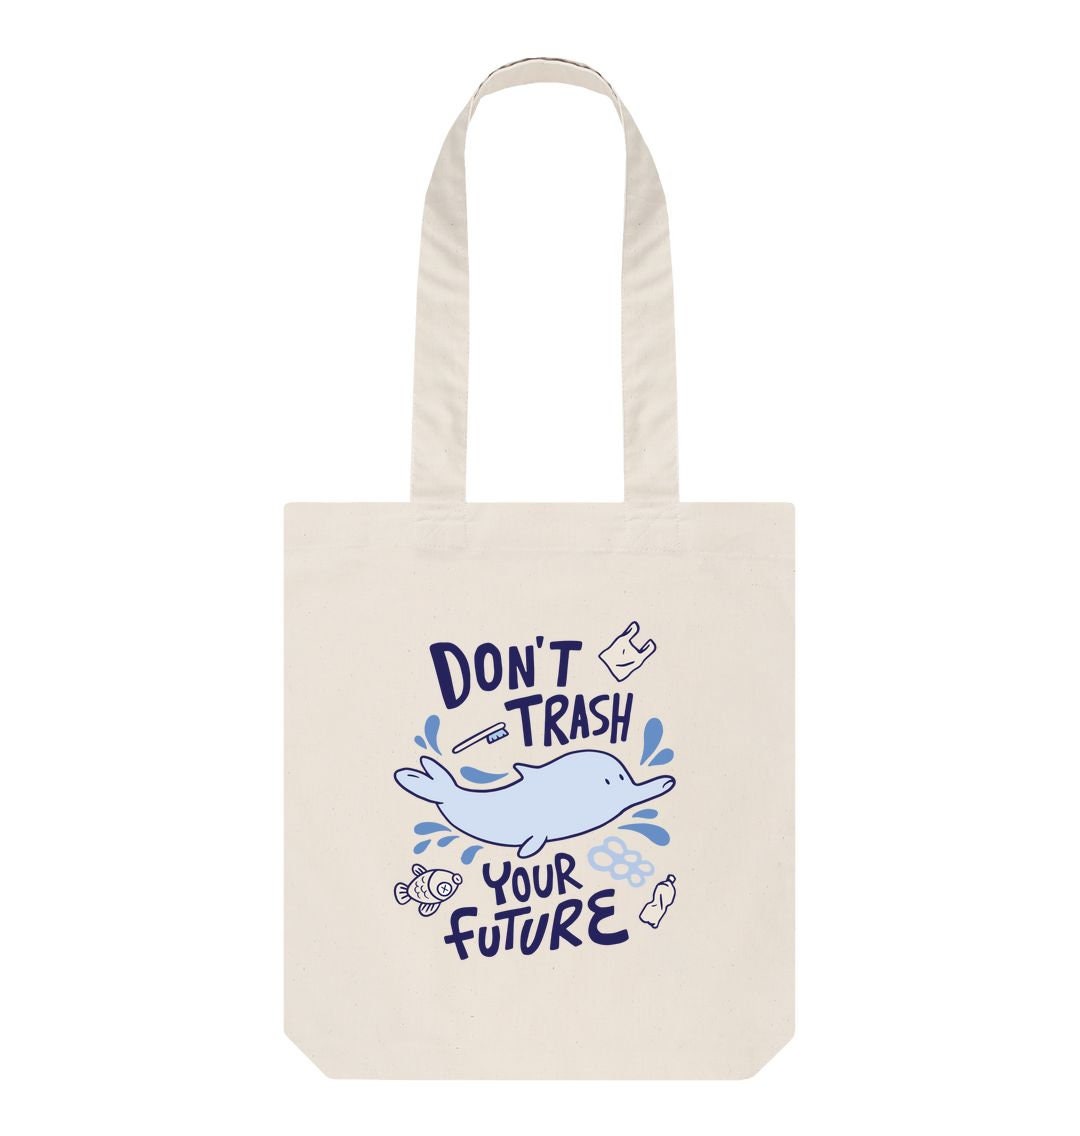 Paper bags – printing on bags, Promotional Products